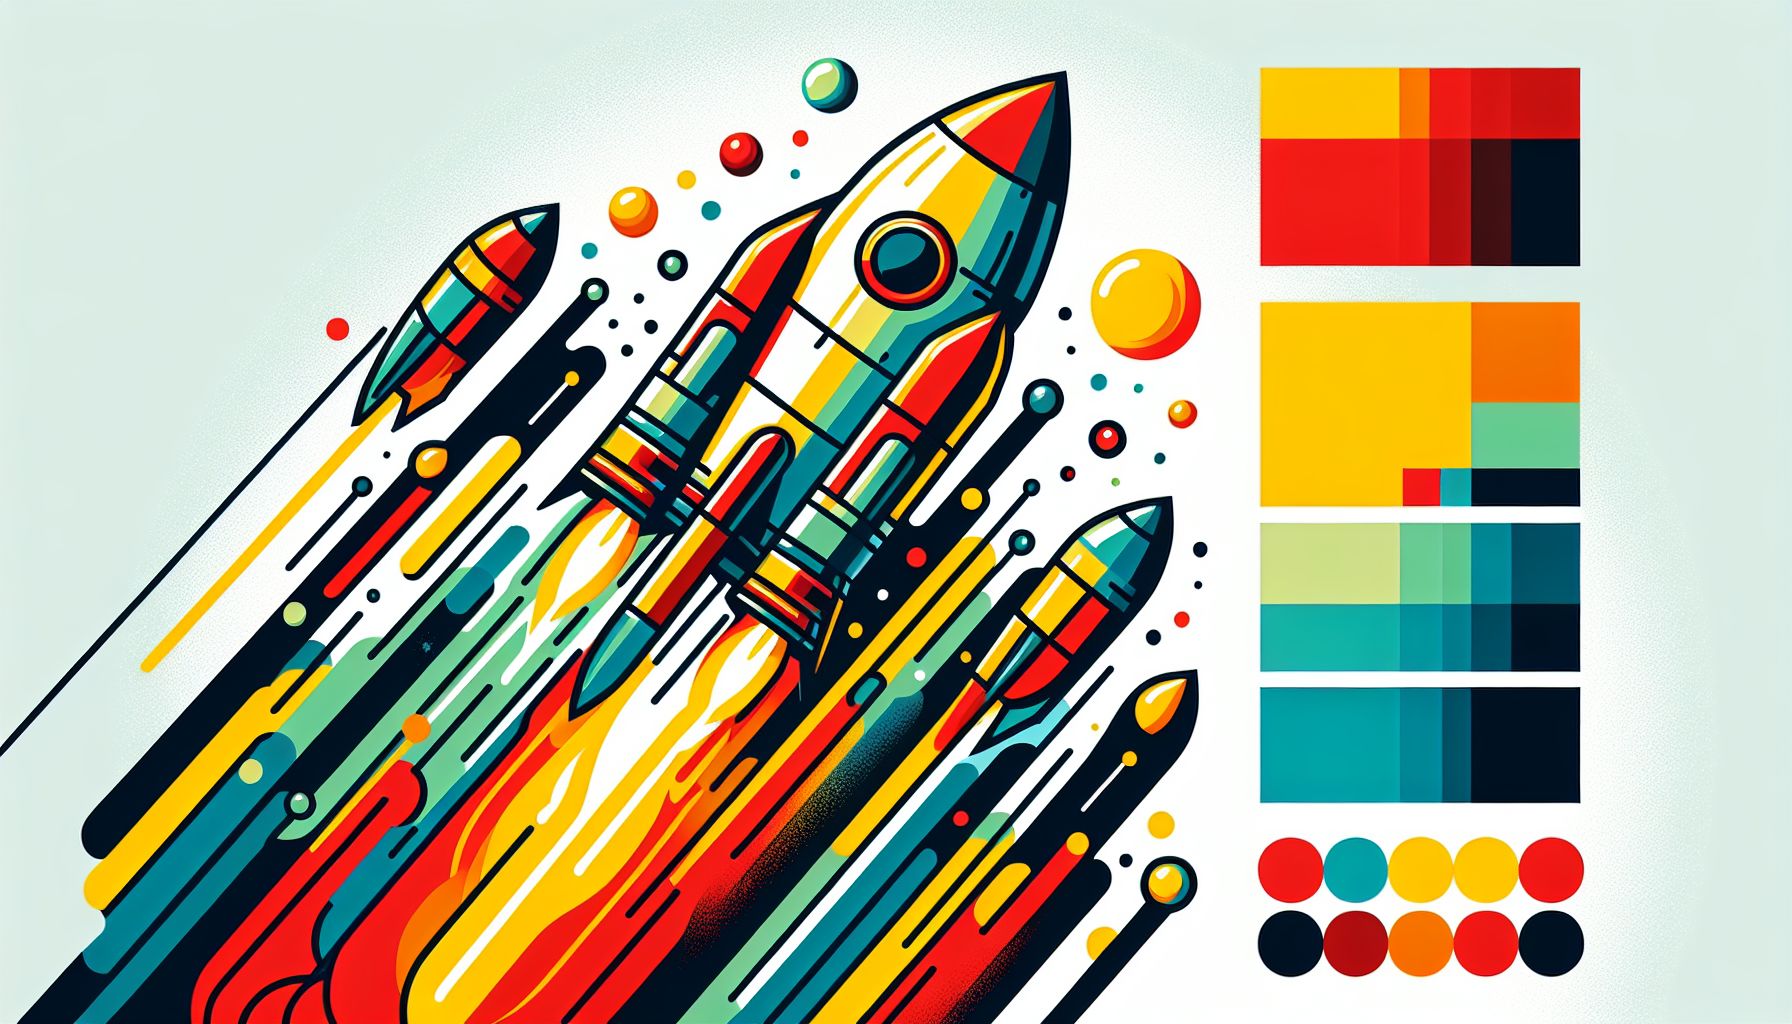 Rocket in flat illustration style and white background, red #f47574, green #88c7a8, yellow #fcc44b, and blue #645bc8 colors.